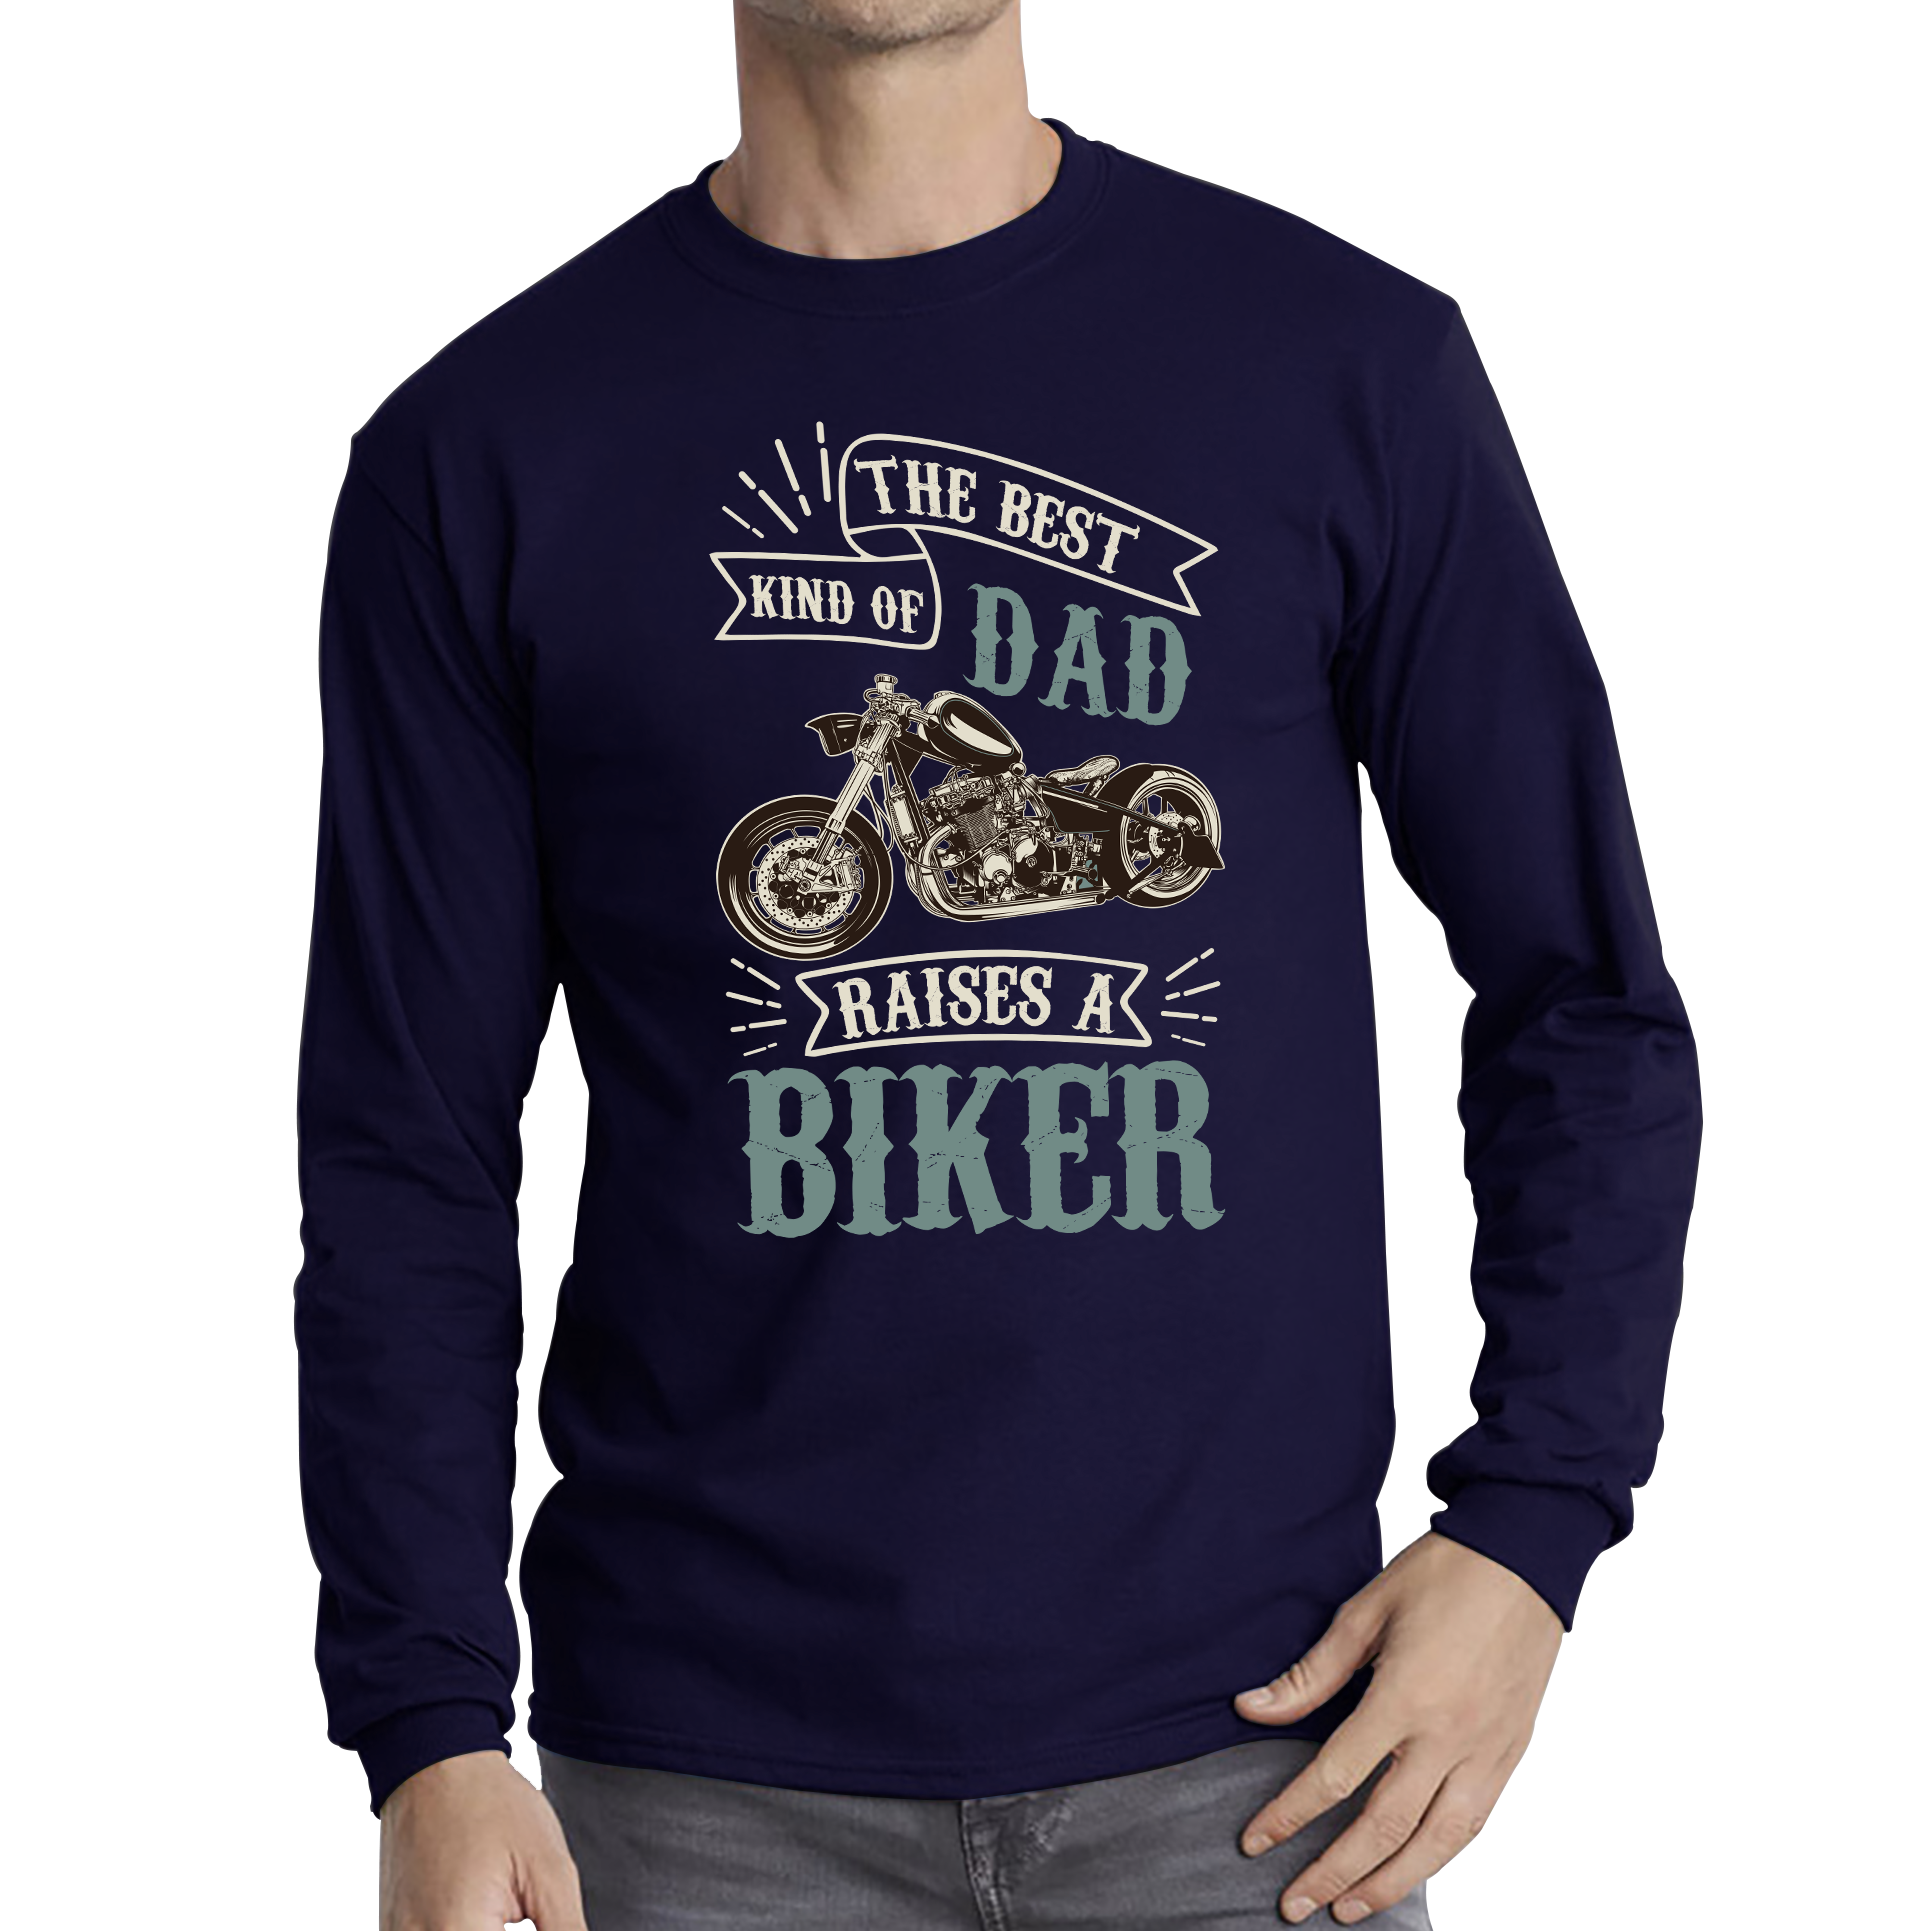 The Best Kind Of Dad Raises A Biker Shirt Father's Day Funny Bike Lover Racers Long Sleeve T Shirt